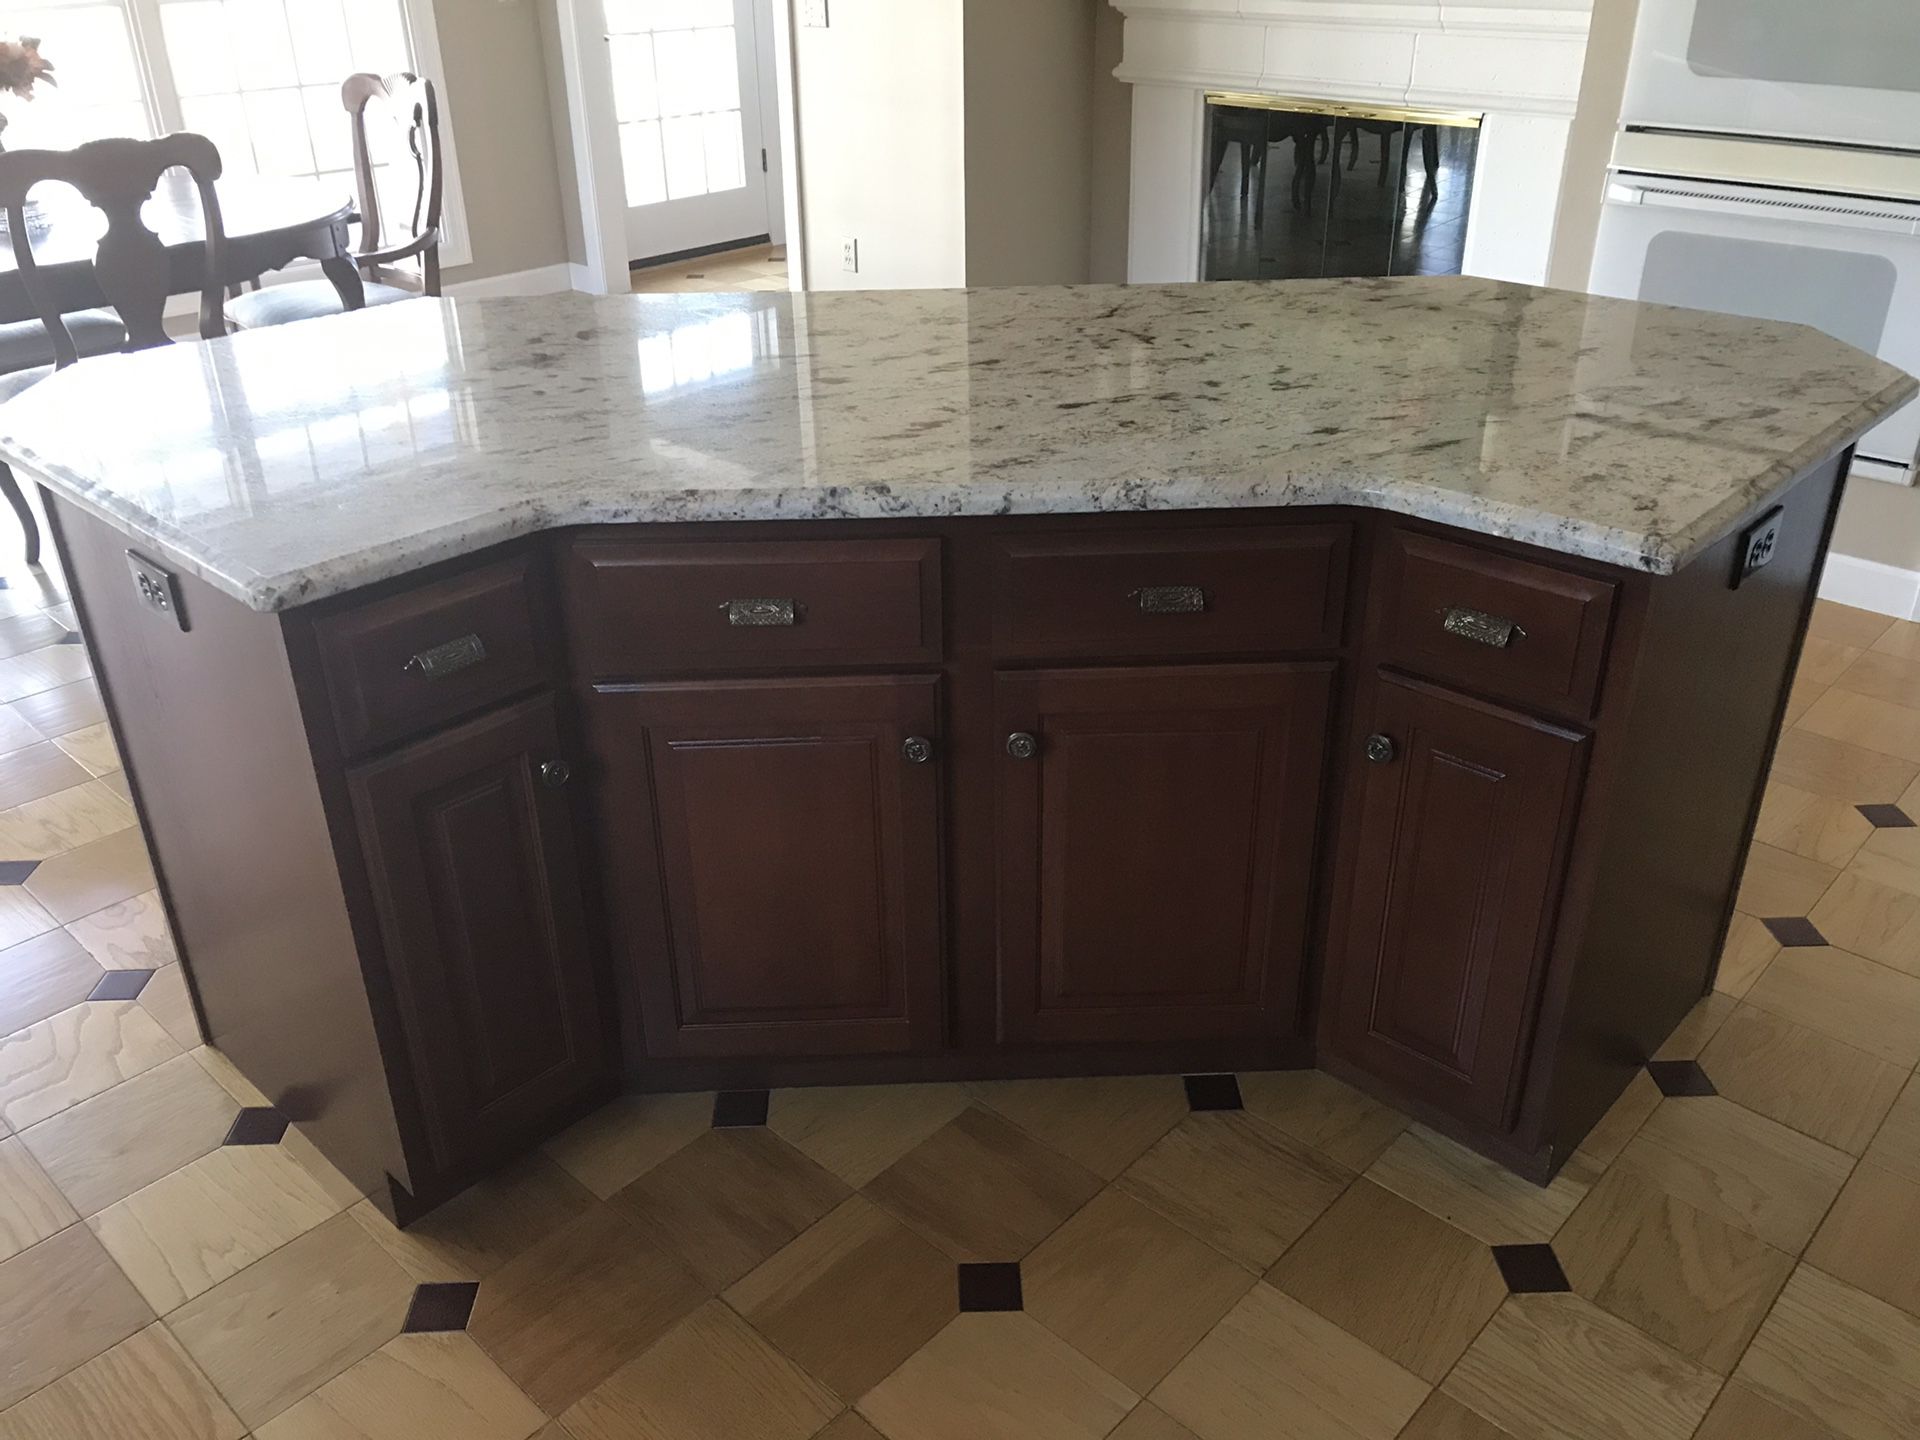 Kitchen - like new condition - Aristokraft cherry cabinets with granite. Price includes (2015) Kitchen Aid refrigerator, GE cooktop, GE double oven,